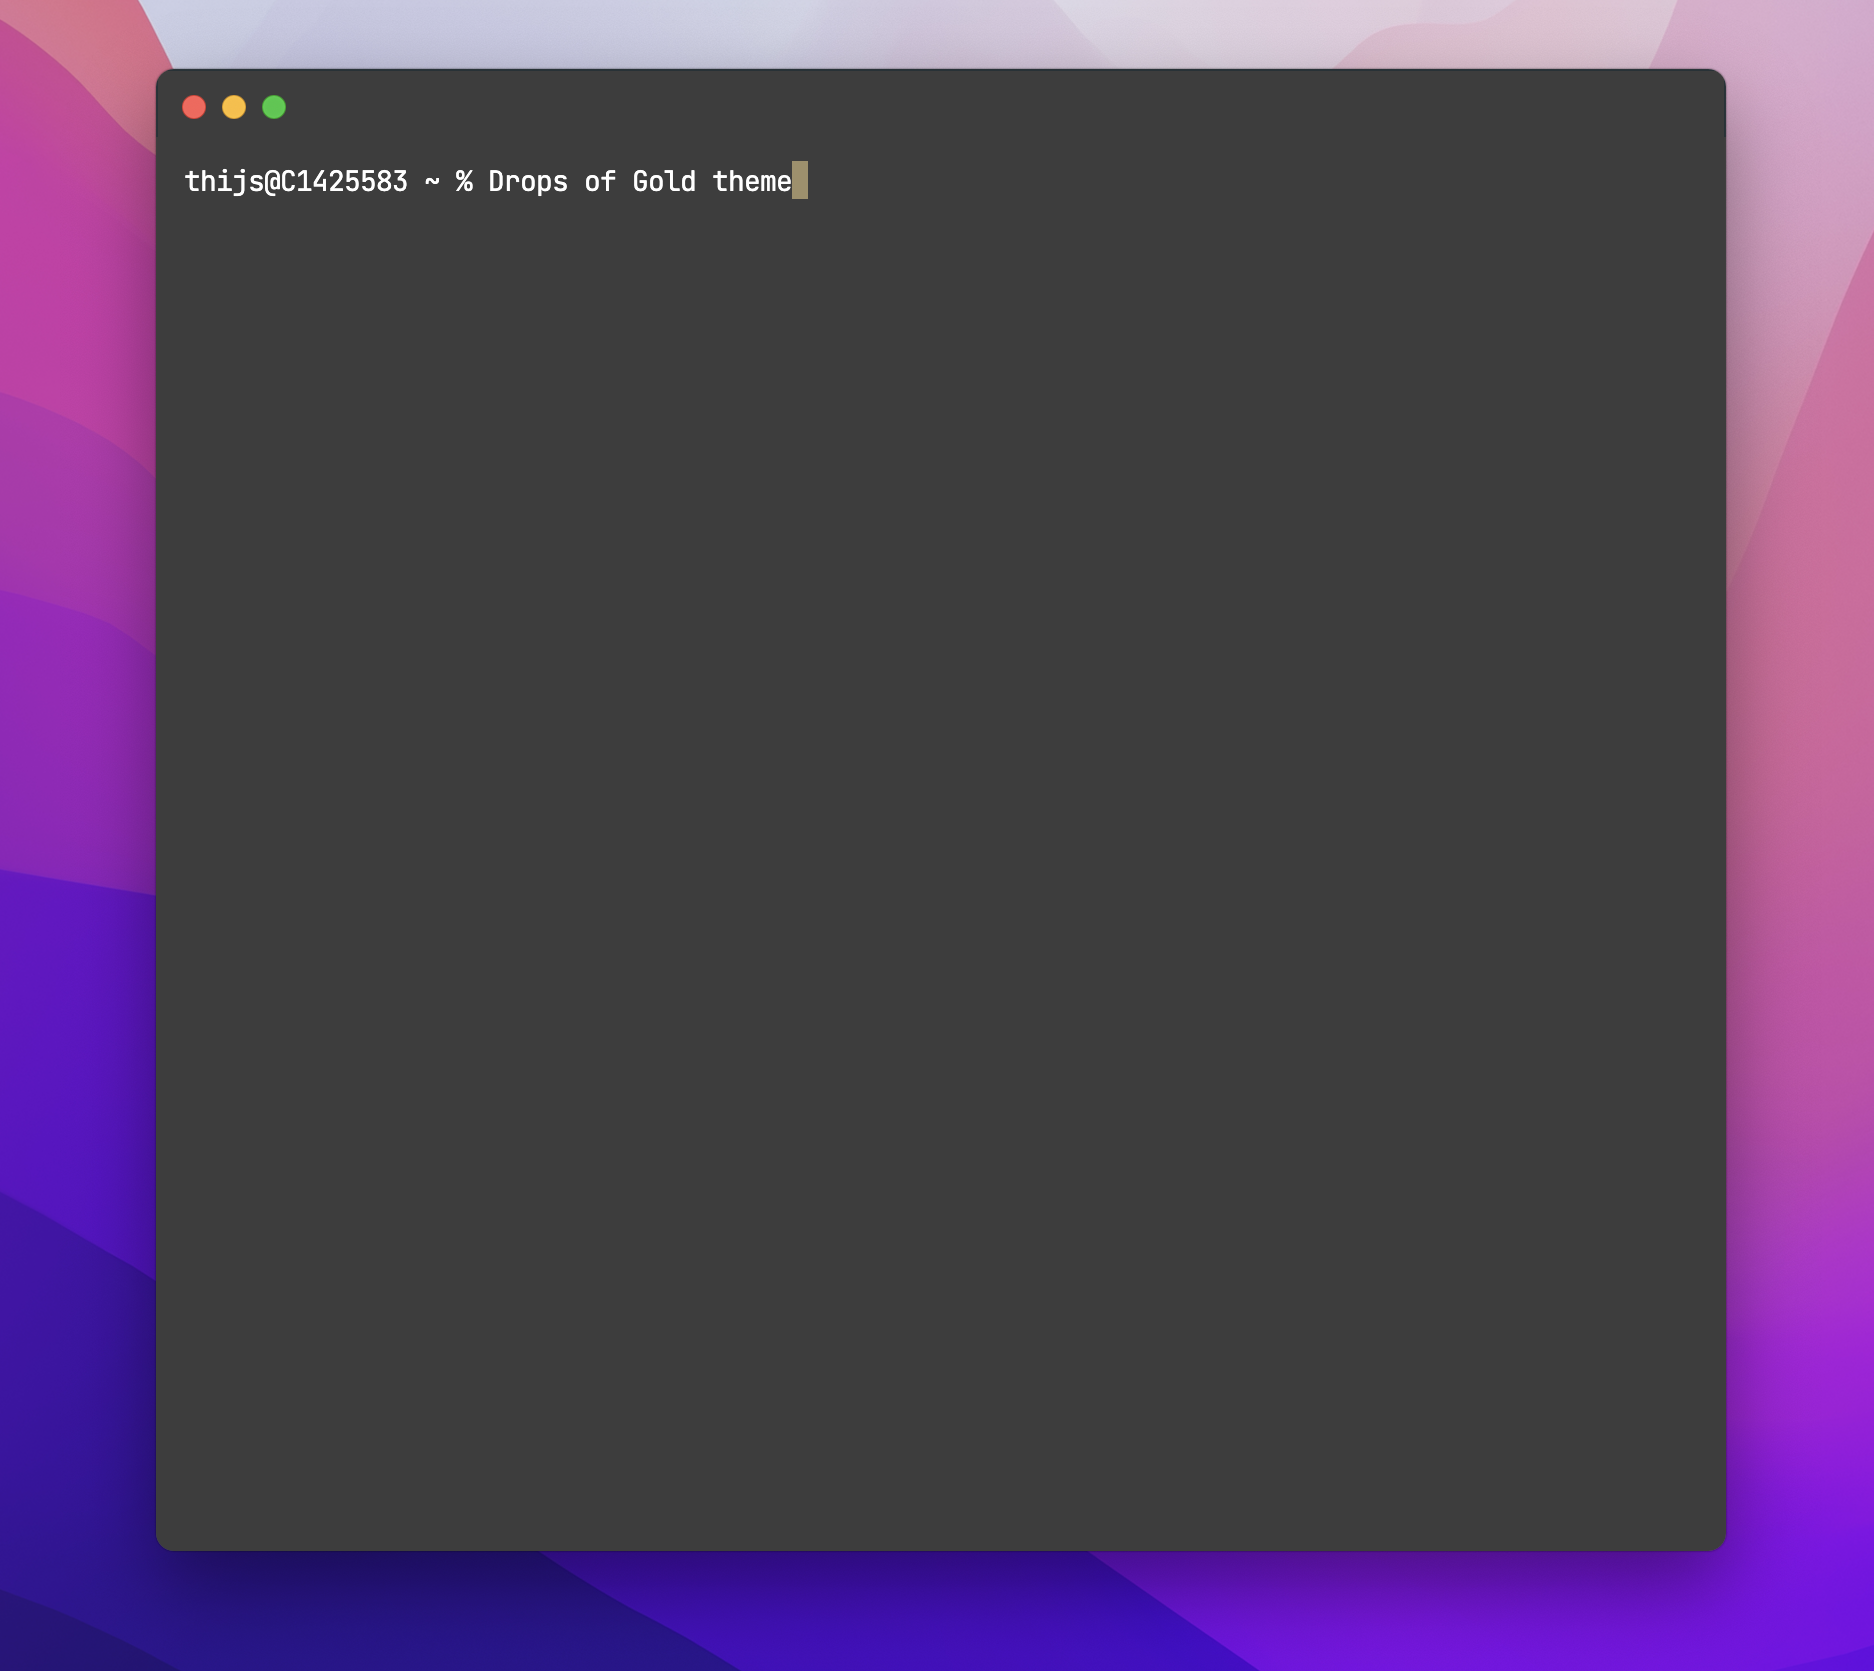 Drops of Gold color Theme for Hyper terminal